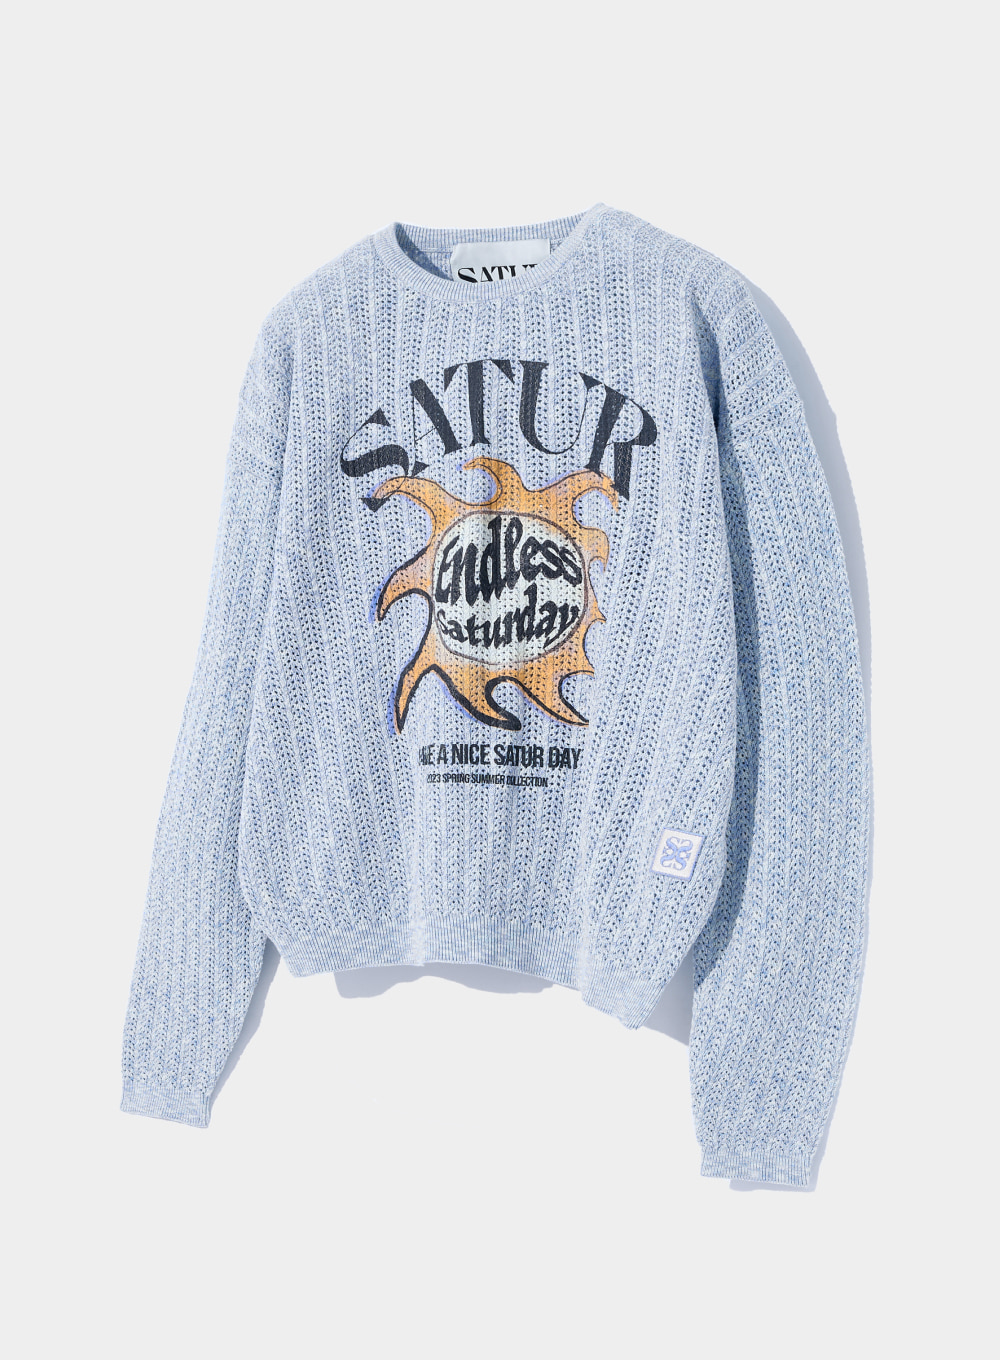 Sun Retro Graphic Meshed Knit - See Blue